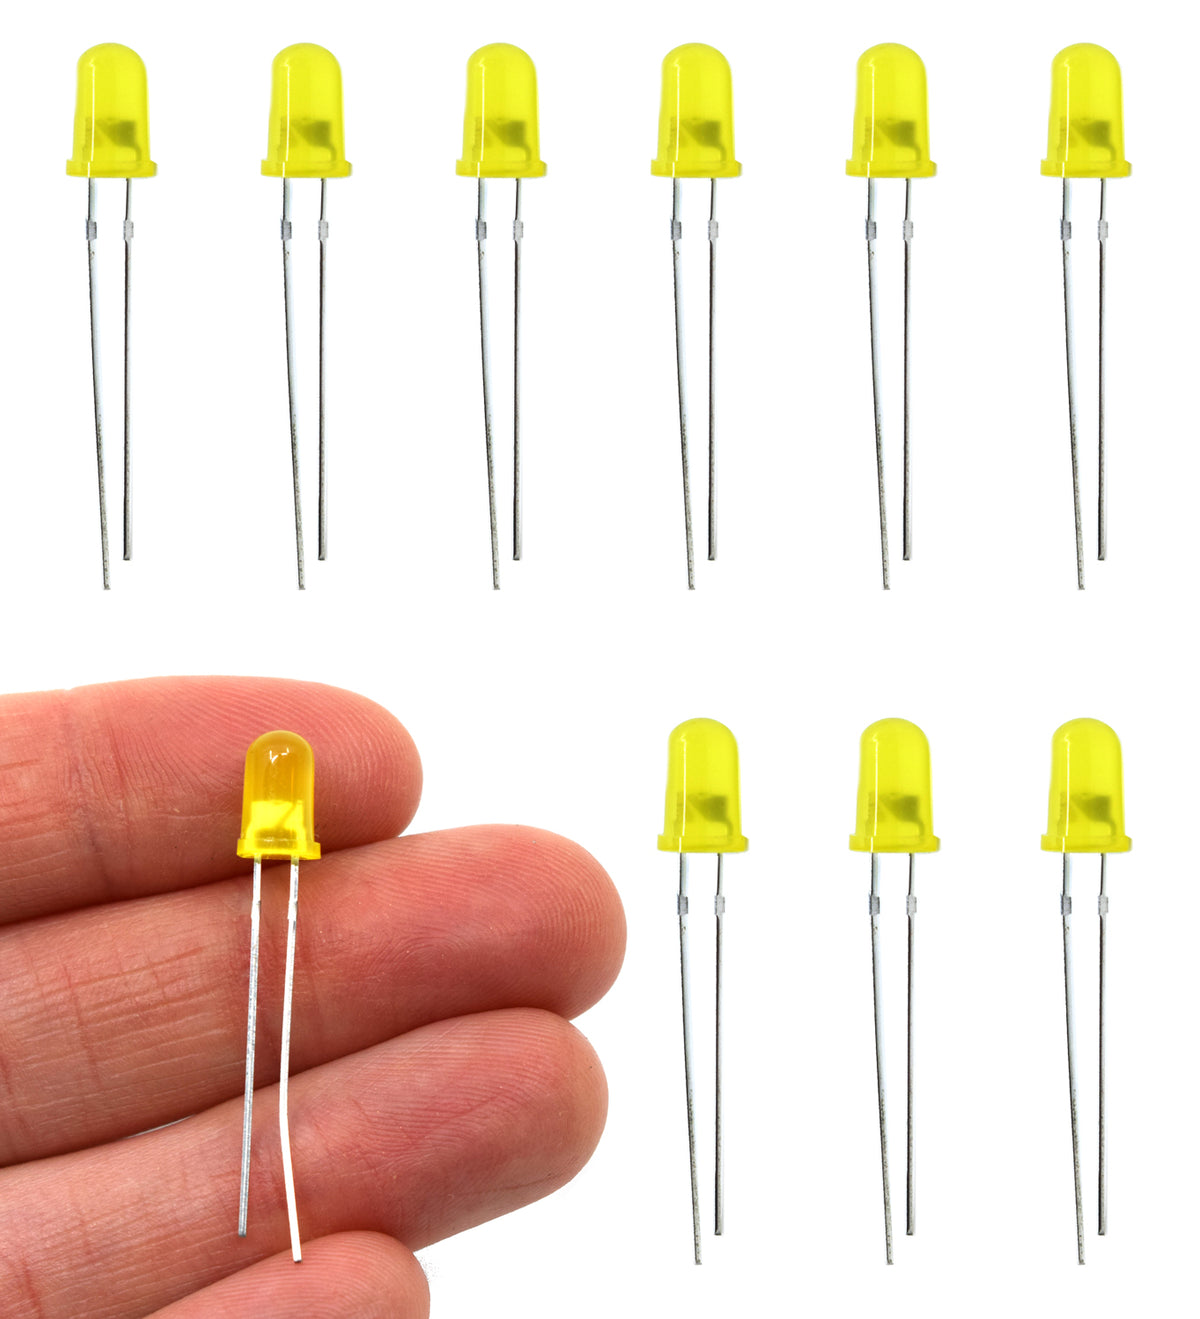 tolv skat Observatory Light Emitting Diode (LED), Yellow, 5mm Standard High Quality, Diffuse —  Eisco Labs